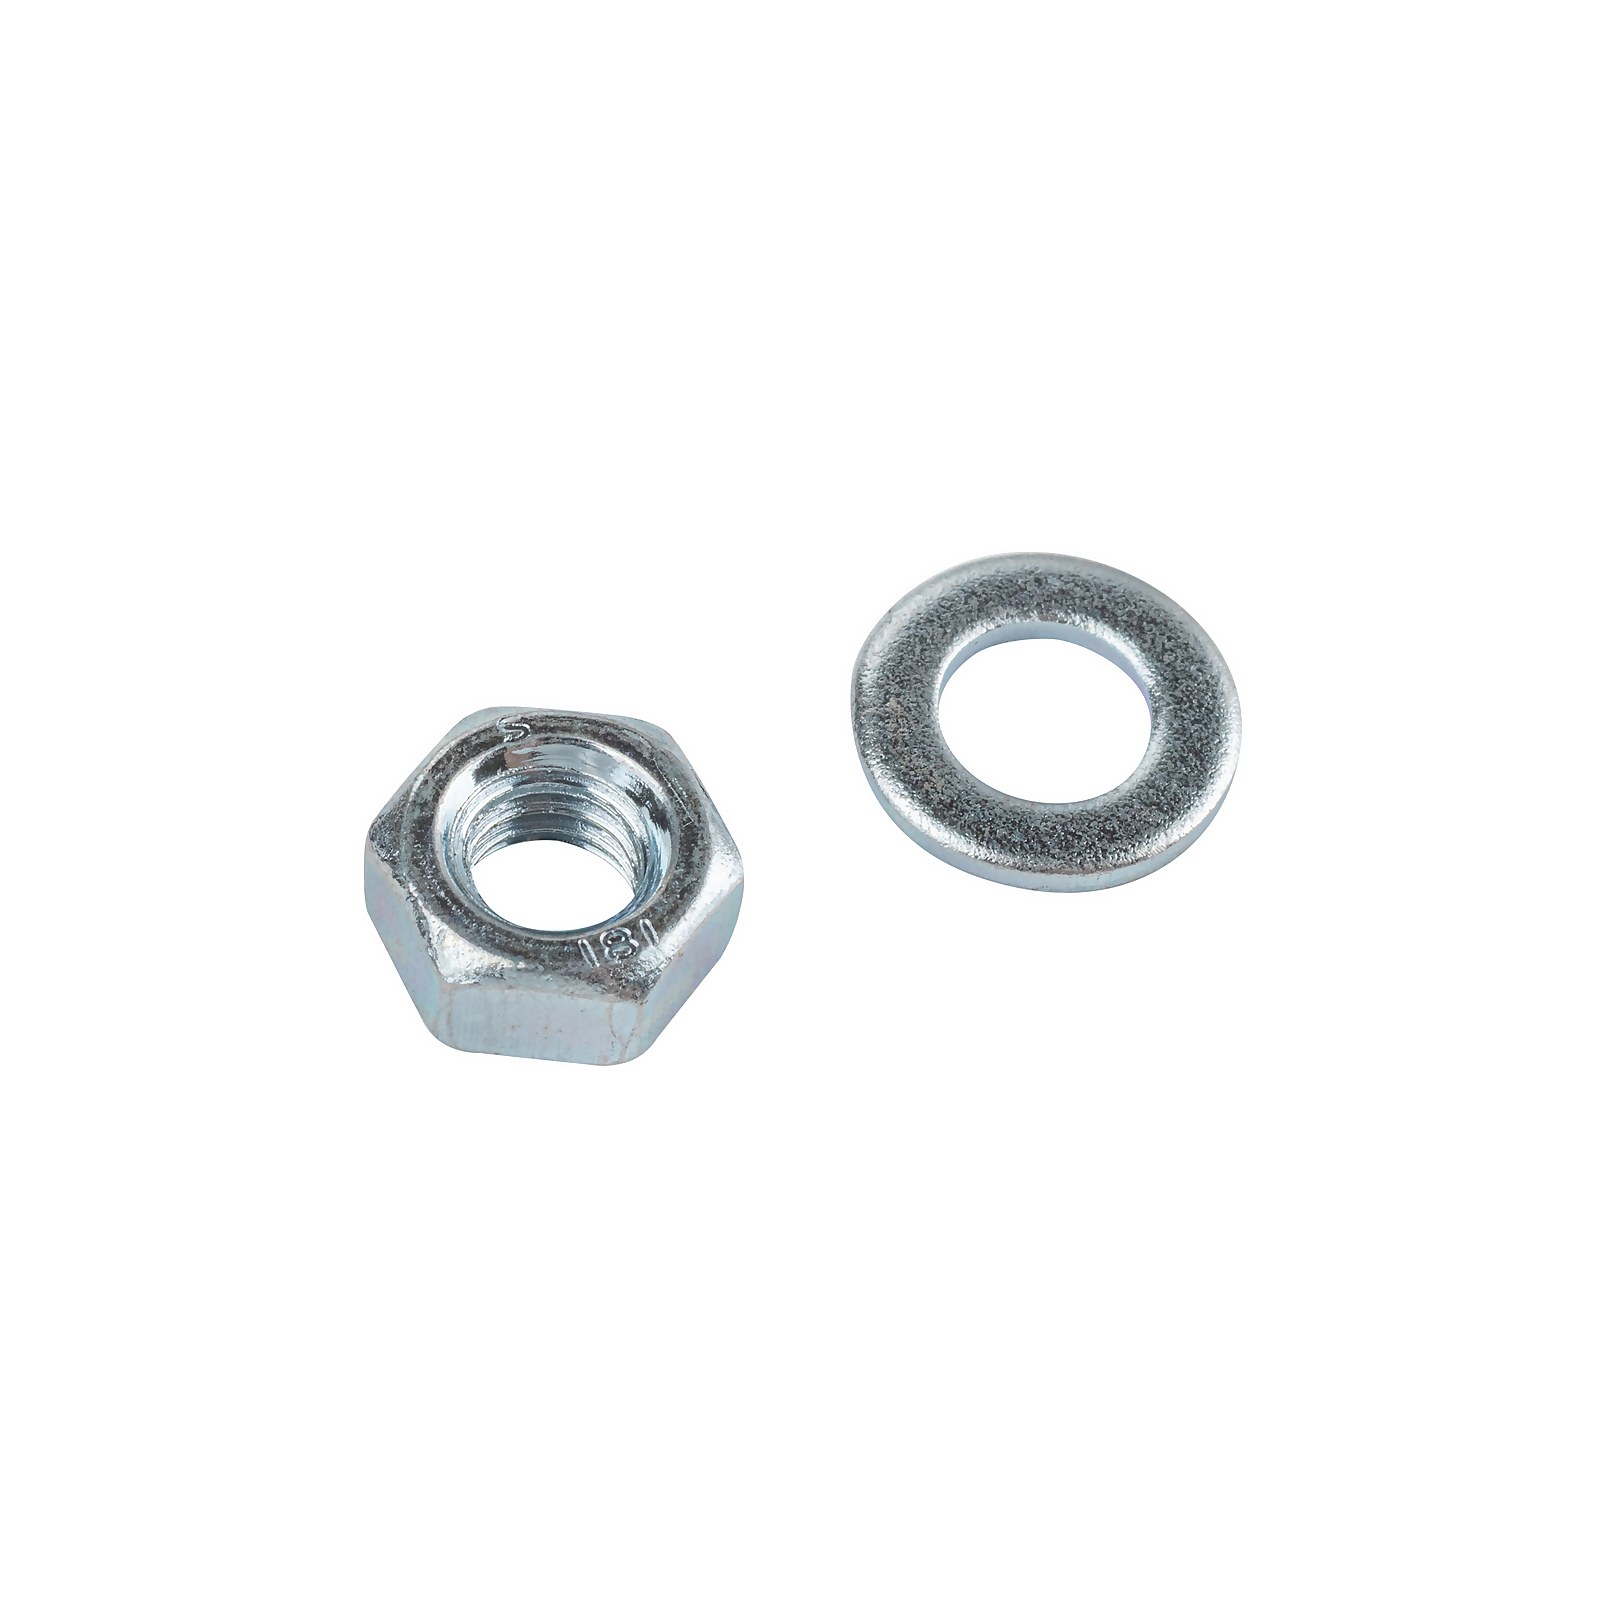 Photo of Homebase Zinc Plated Hex Nut & Washer M16 5 Pack